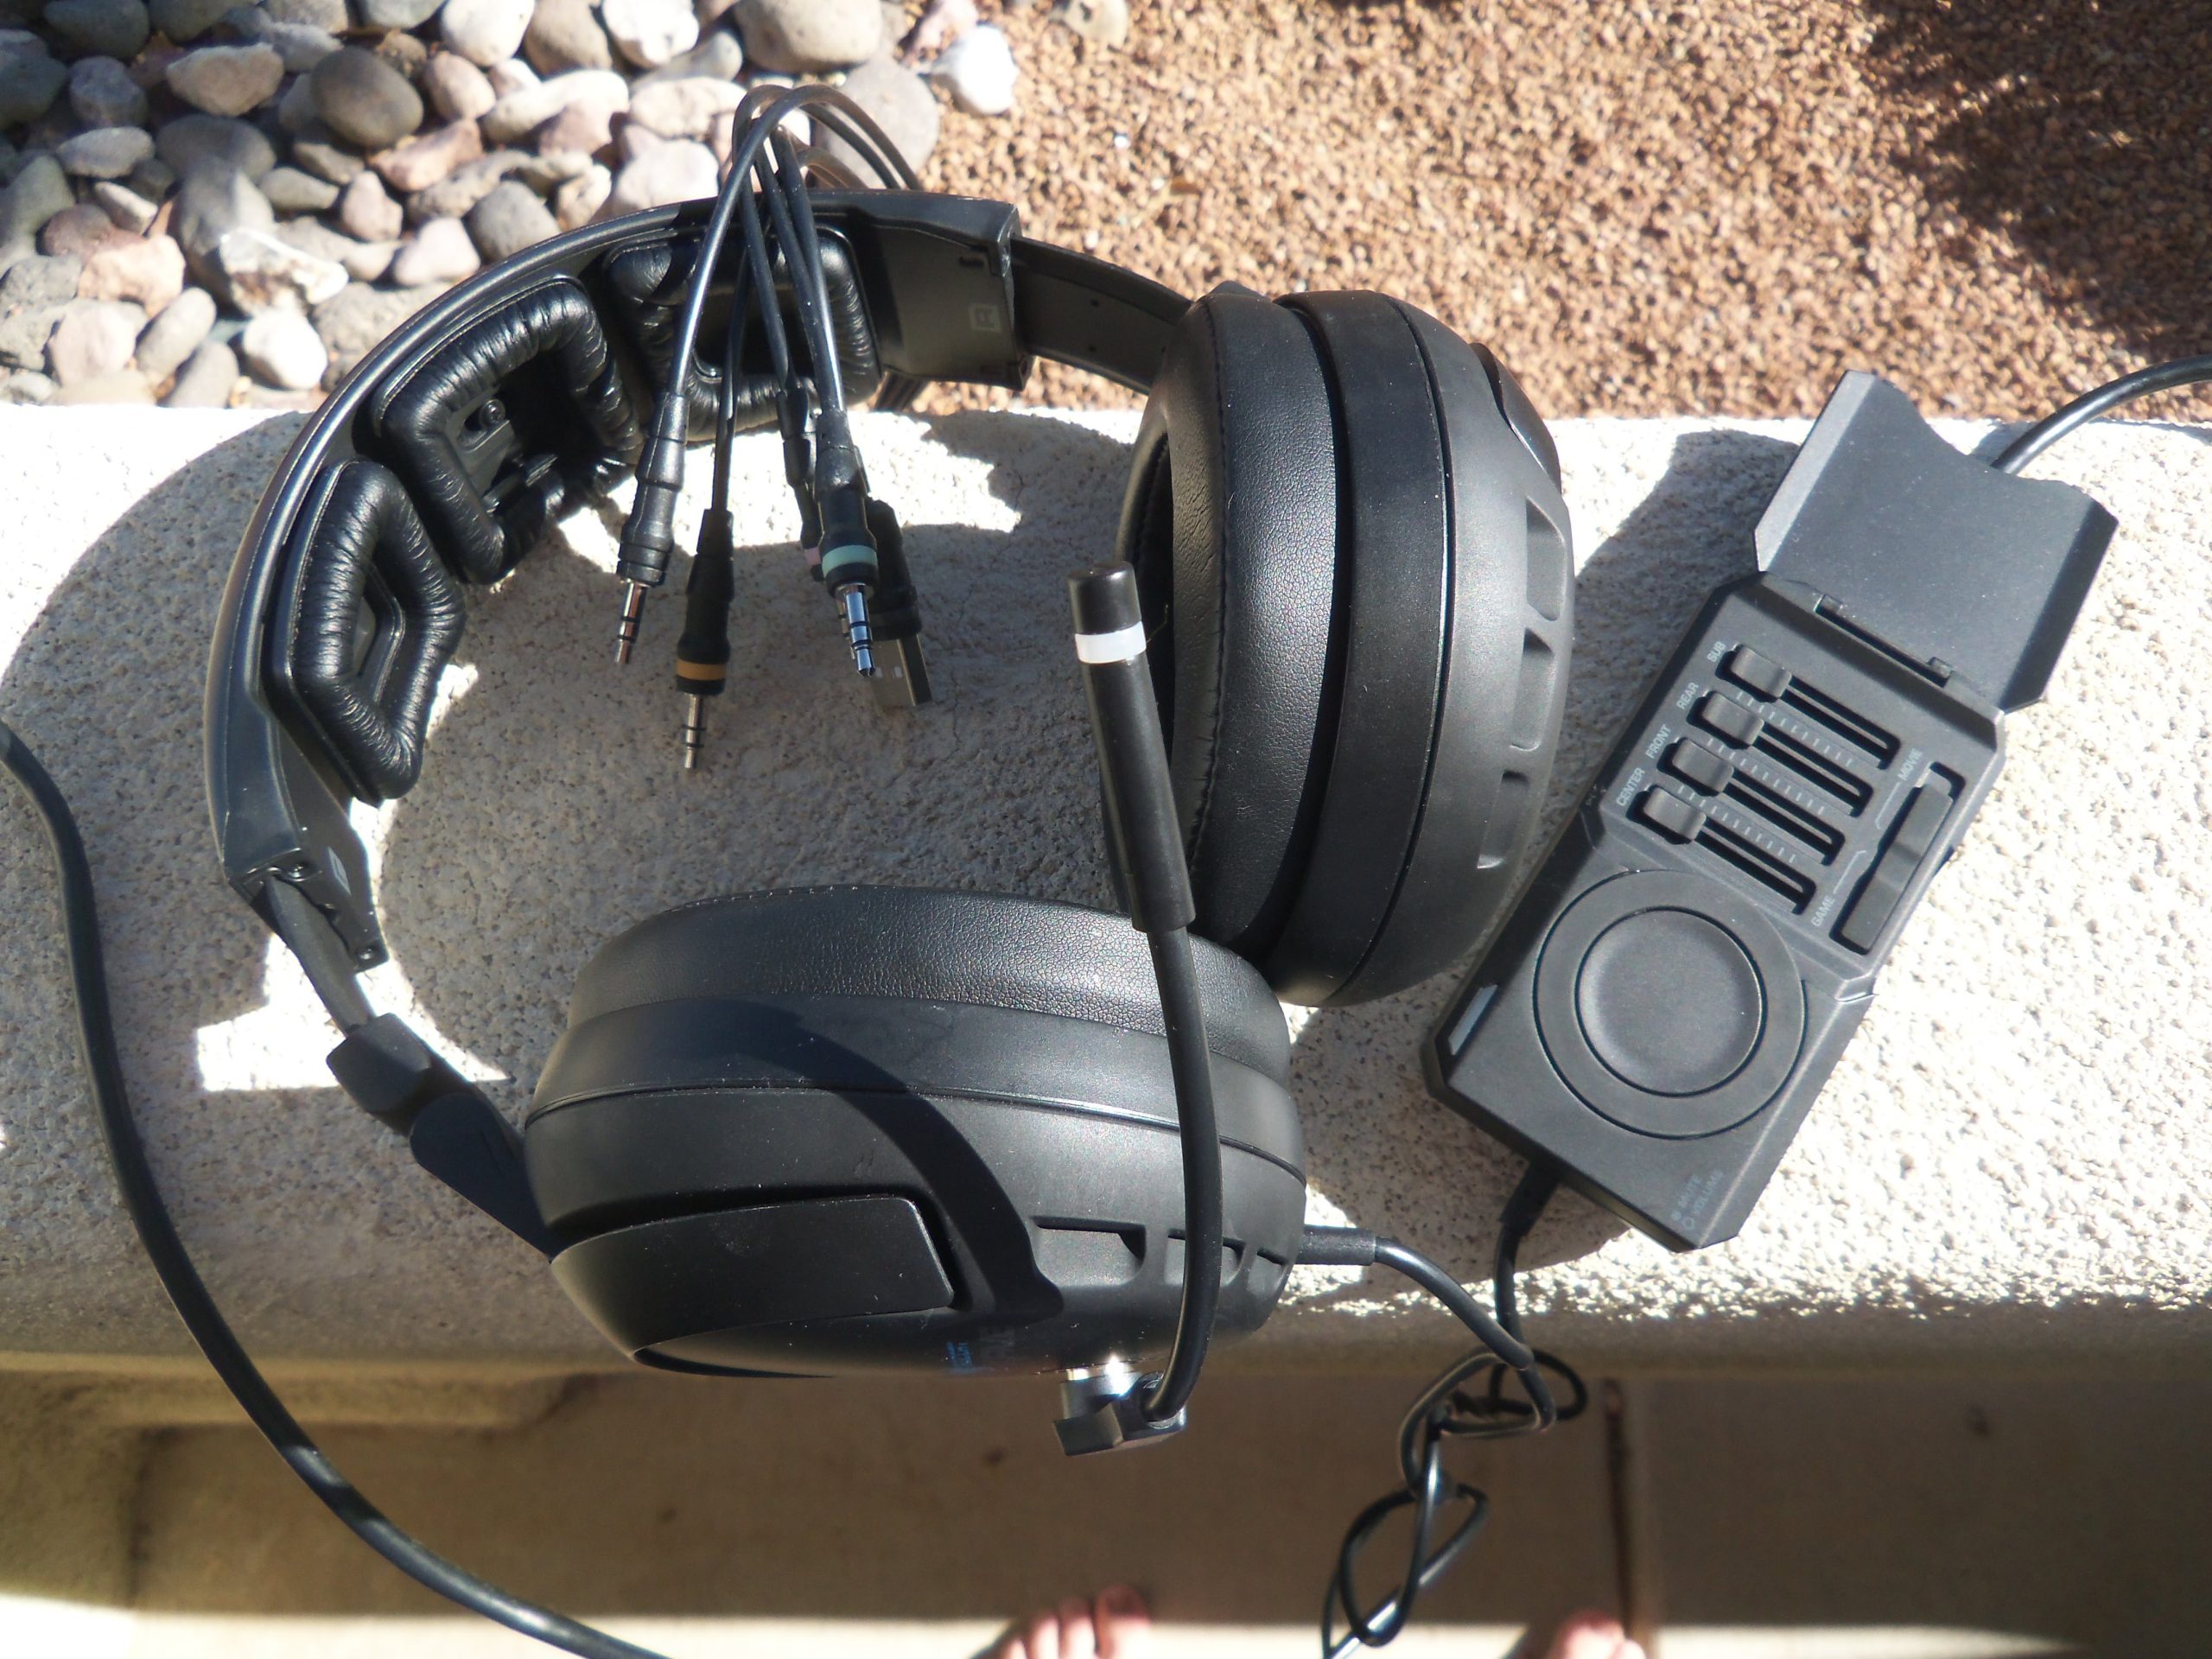 Roccat Kave 5.1 Review - Surround Sound Gaming Headset